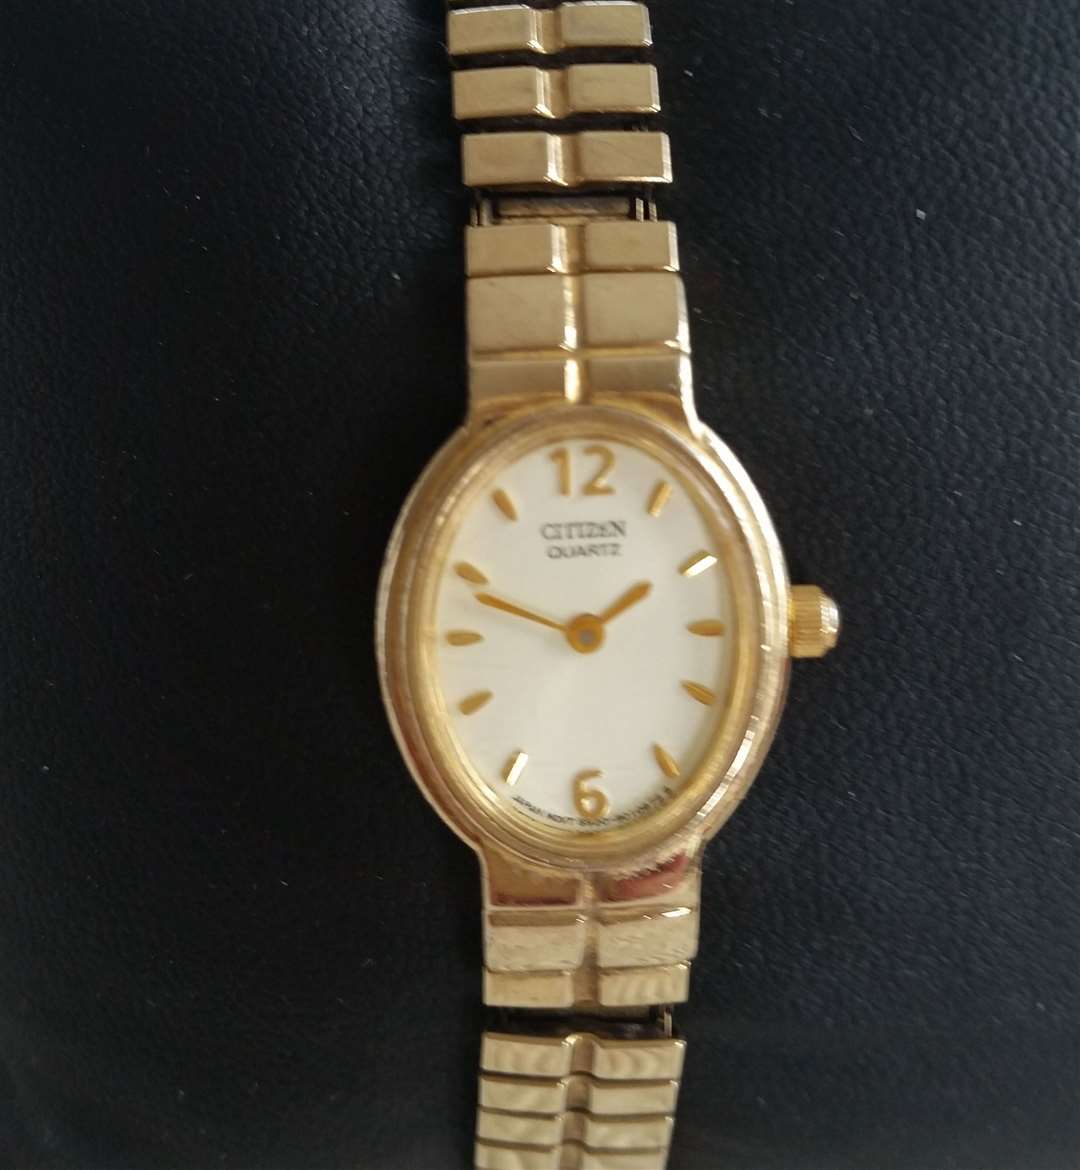 This watch was stolen during the burglary in Paddock Wood Picture: Kent Police